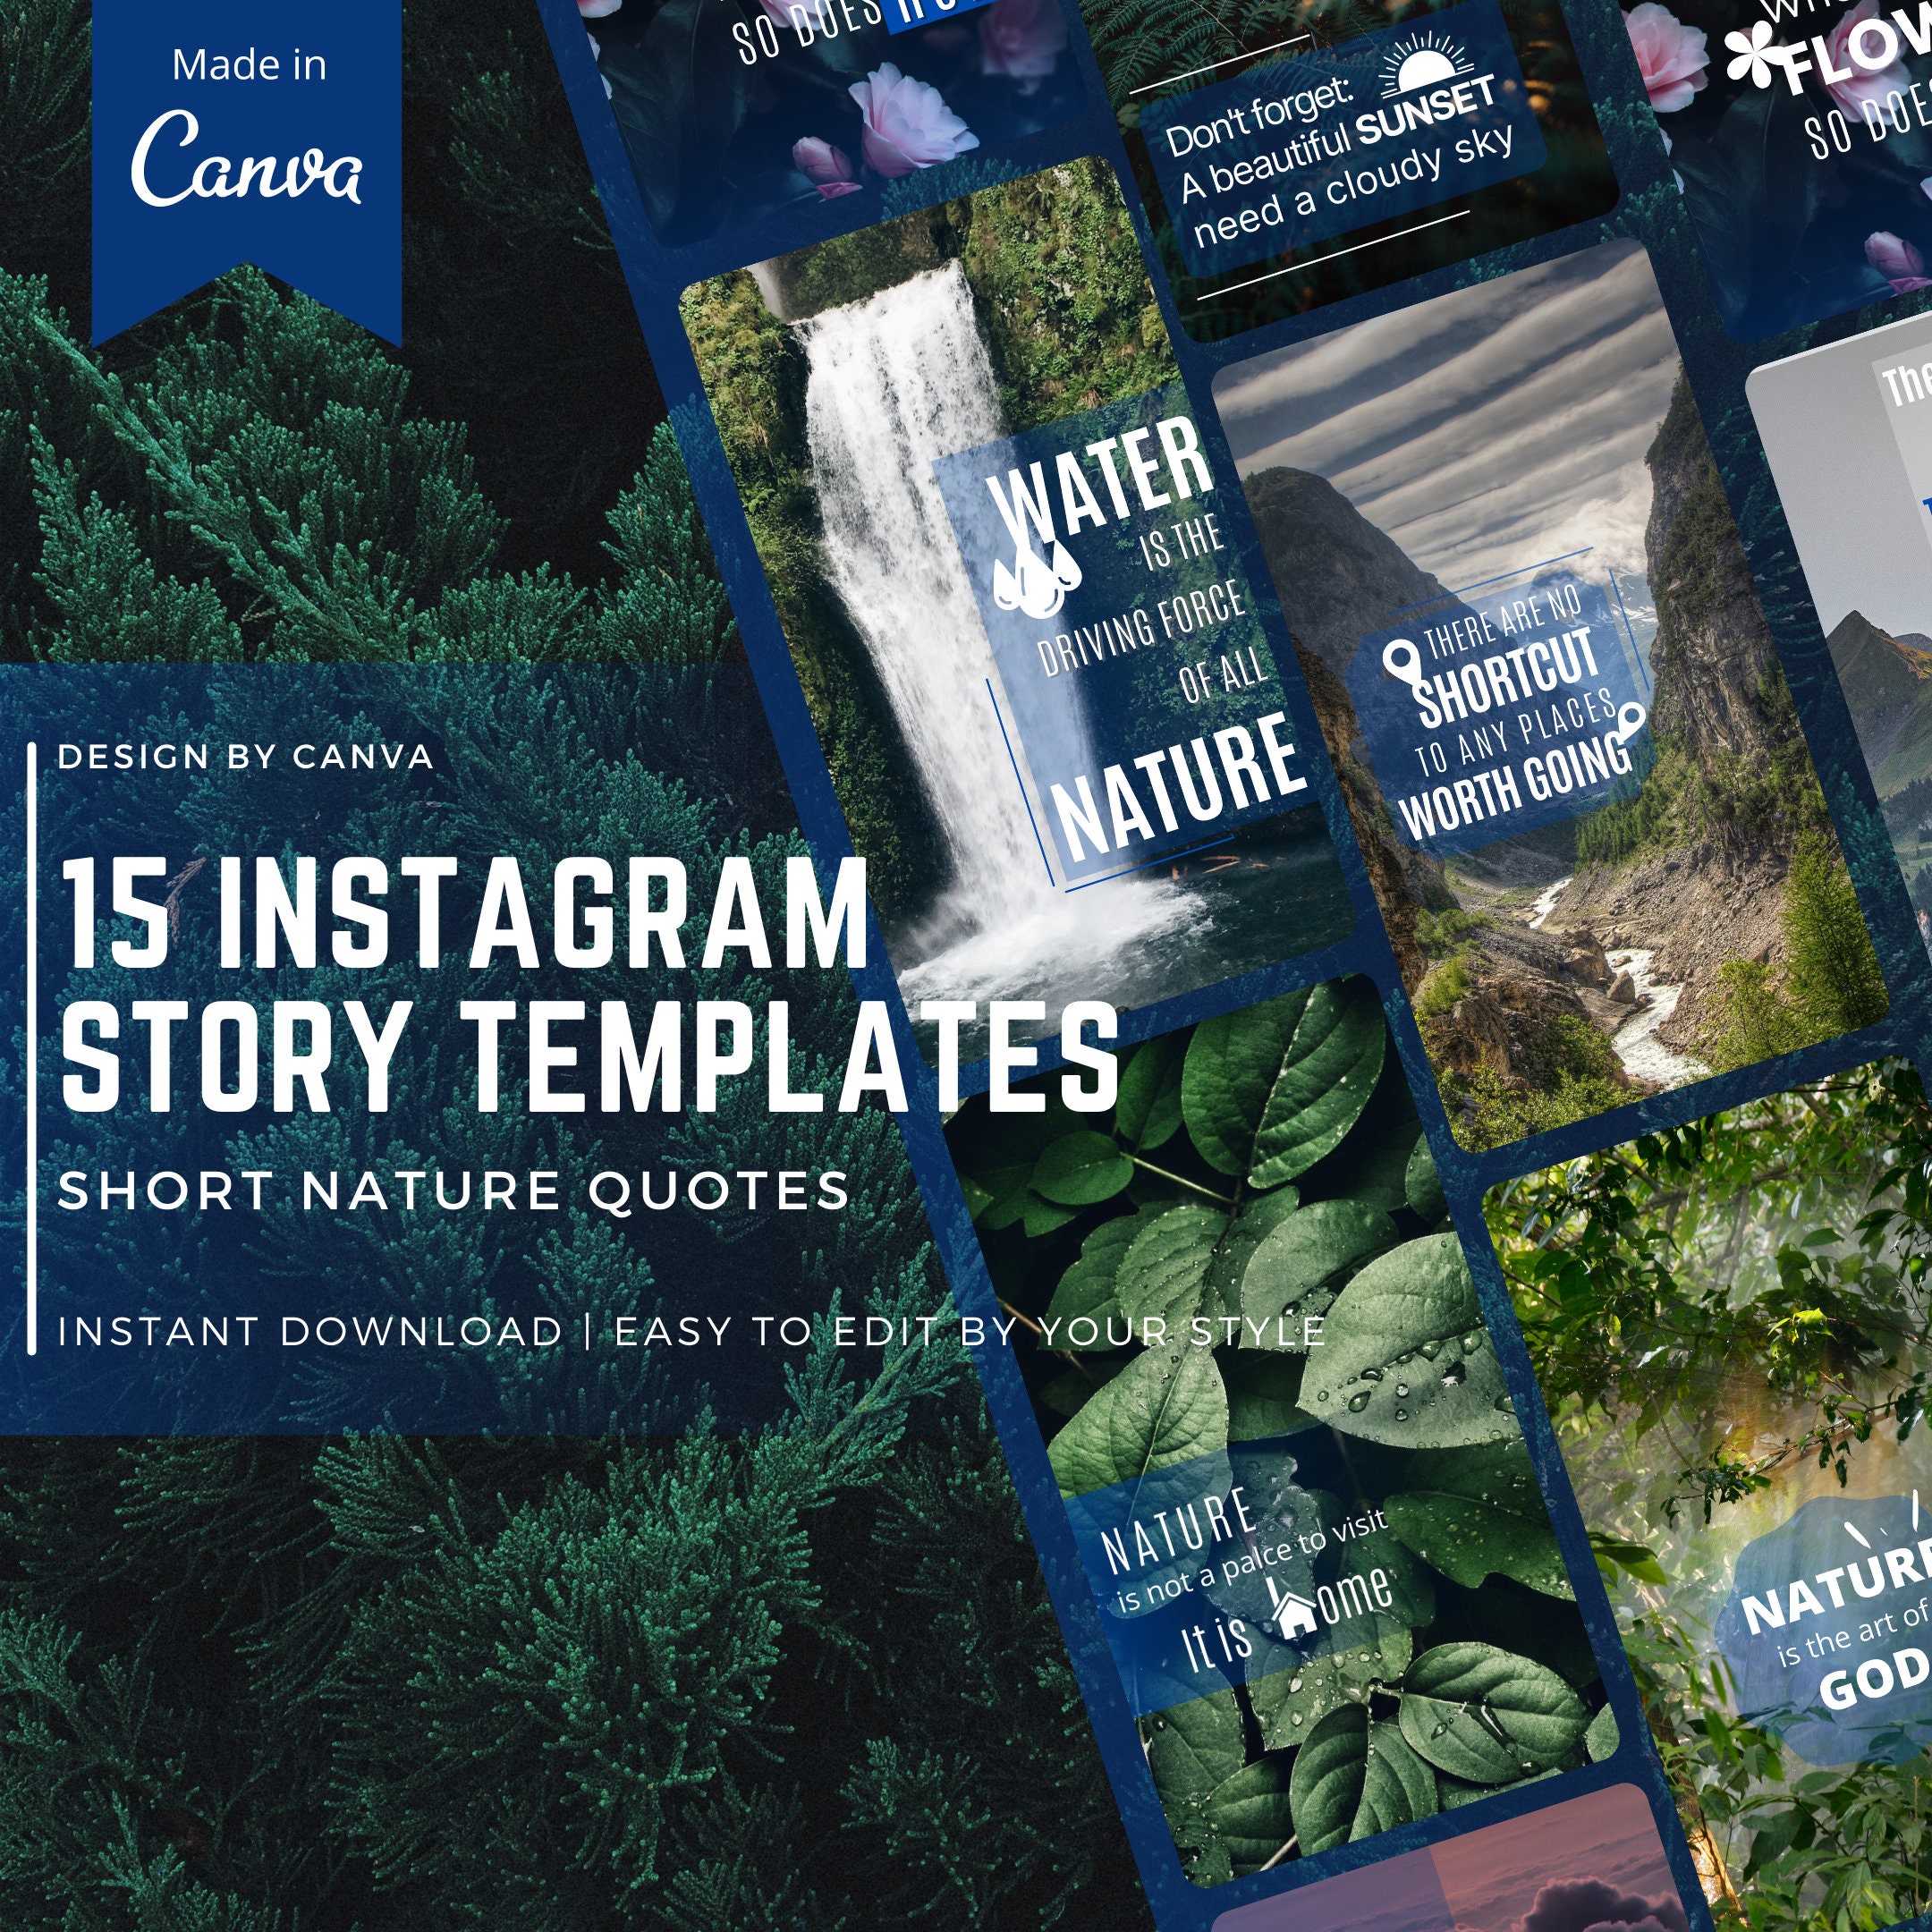 15 SHORT NATURE QUOTES Use For Instagram Story Templates | Etsy